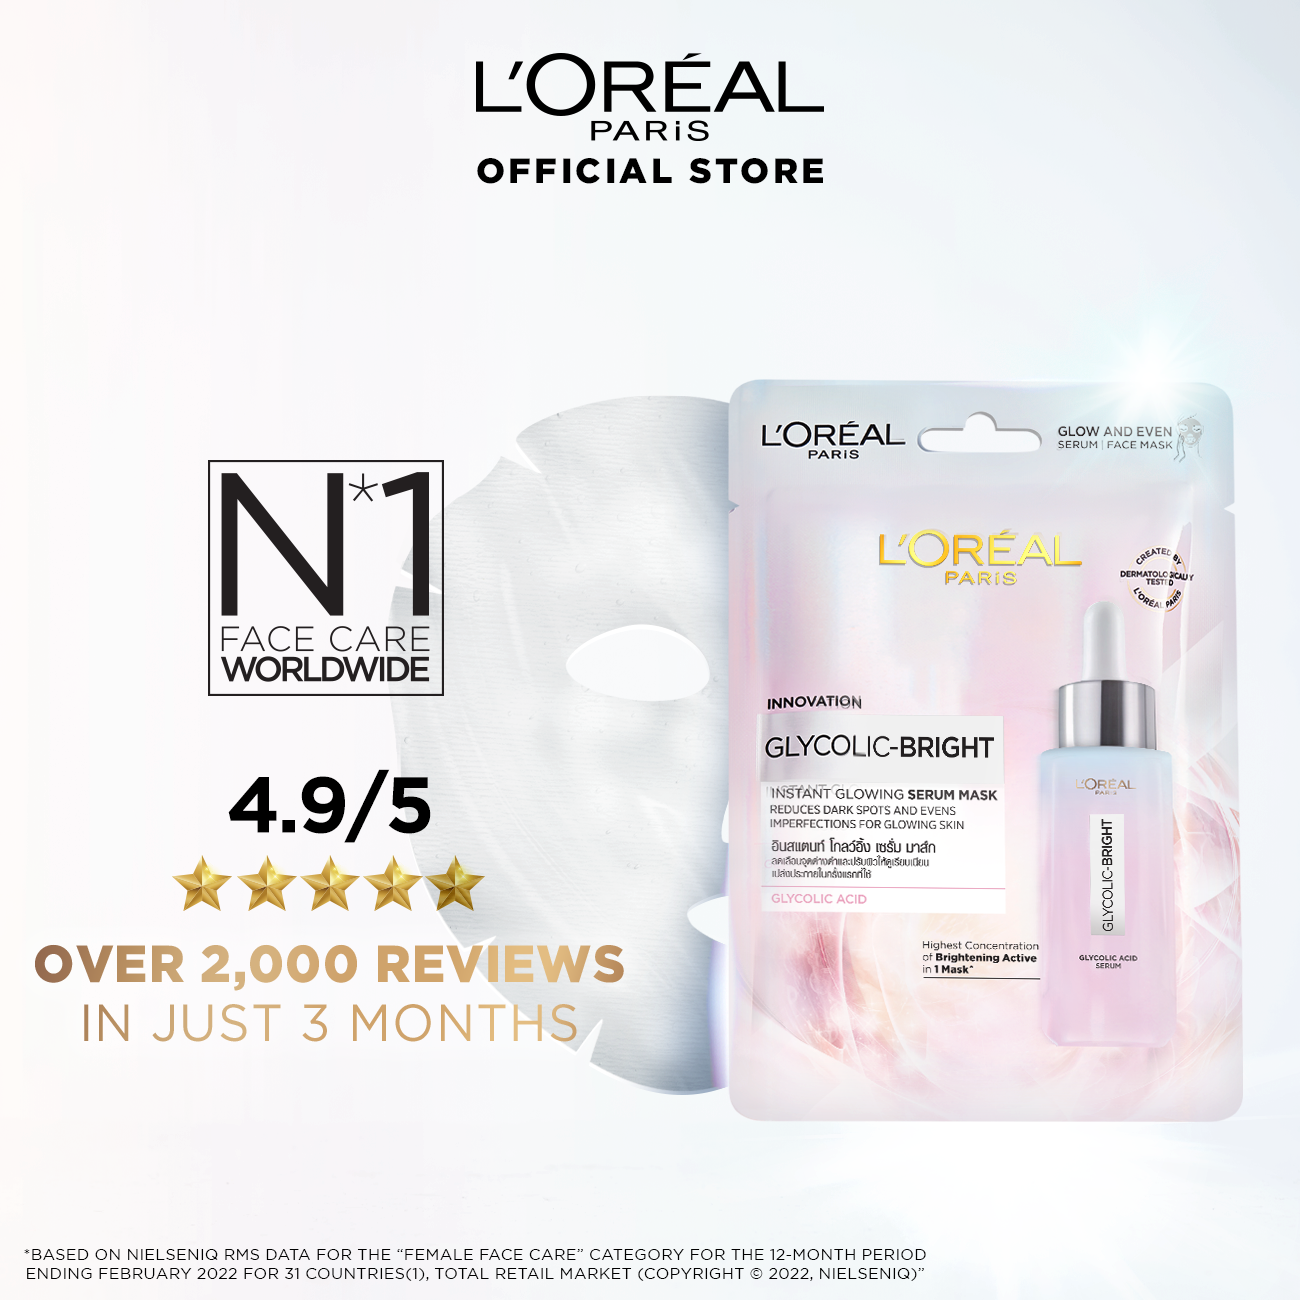 L'Oreal Paris Glycolic Bright Instant Glowing Serum Mask